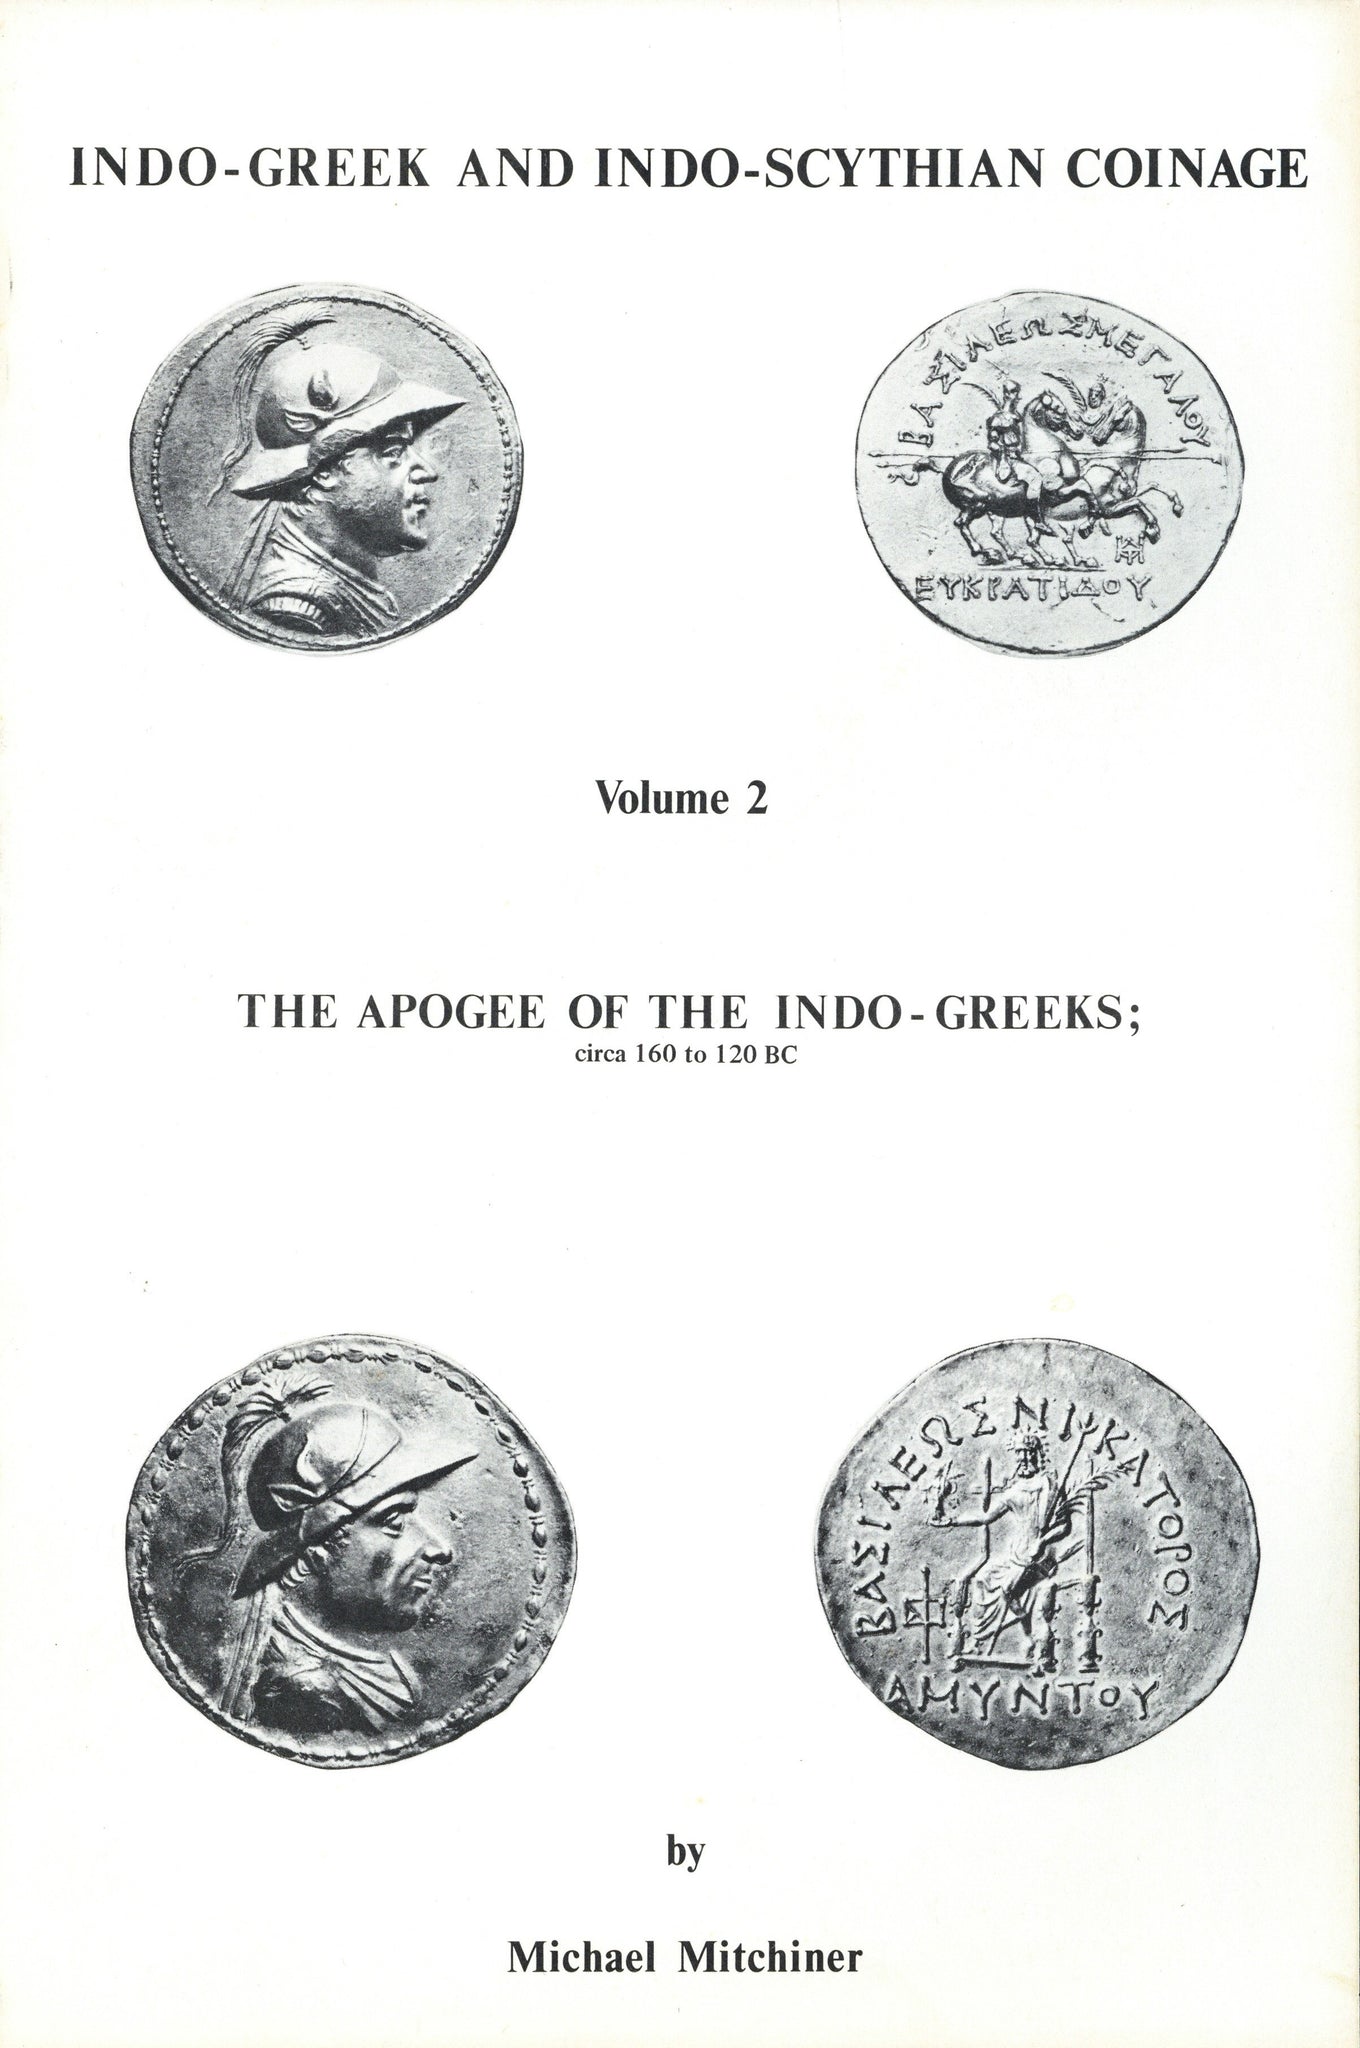 Indo-Greek and Indo-Scythian Coinage, Volume 2: The Apogee of Indo-Greeks; circa 160 - 120 BC by Michael Mitchiner